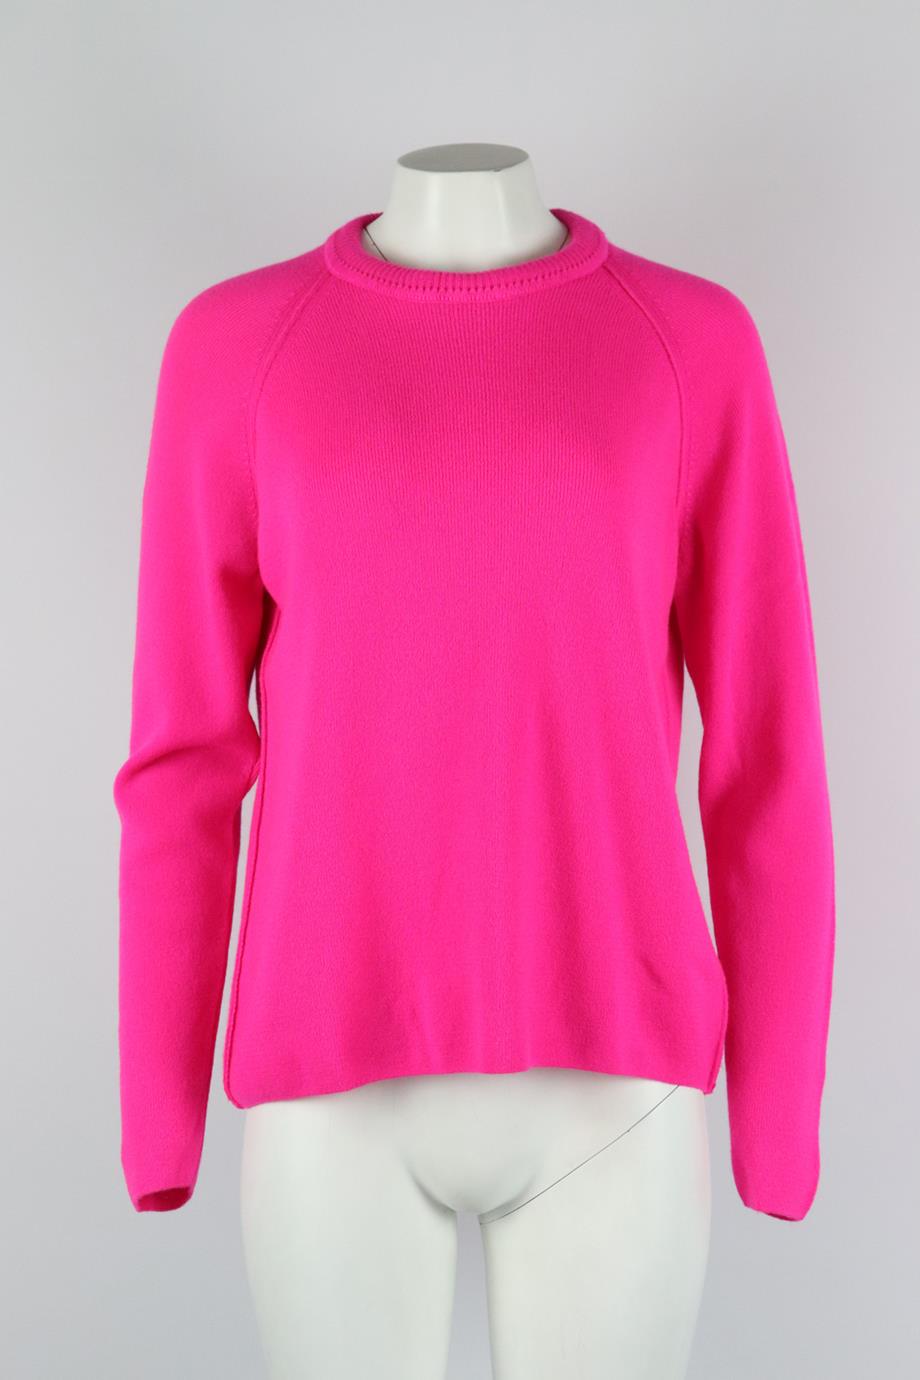 FORTE FORTE WOOL AND CASHMERE BLEND SWEATER UK 12